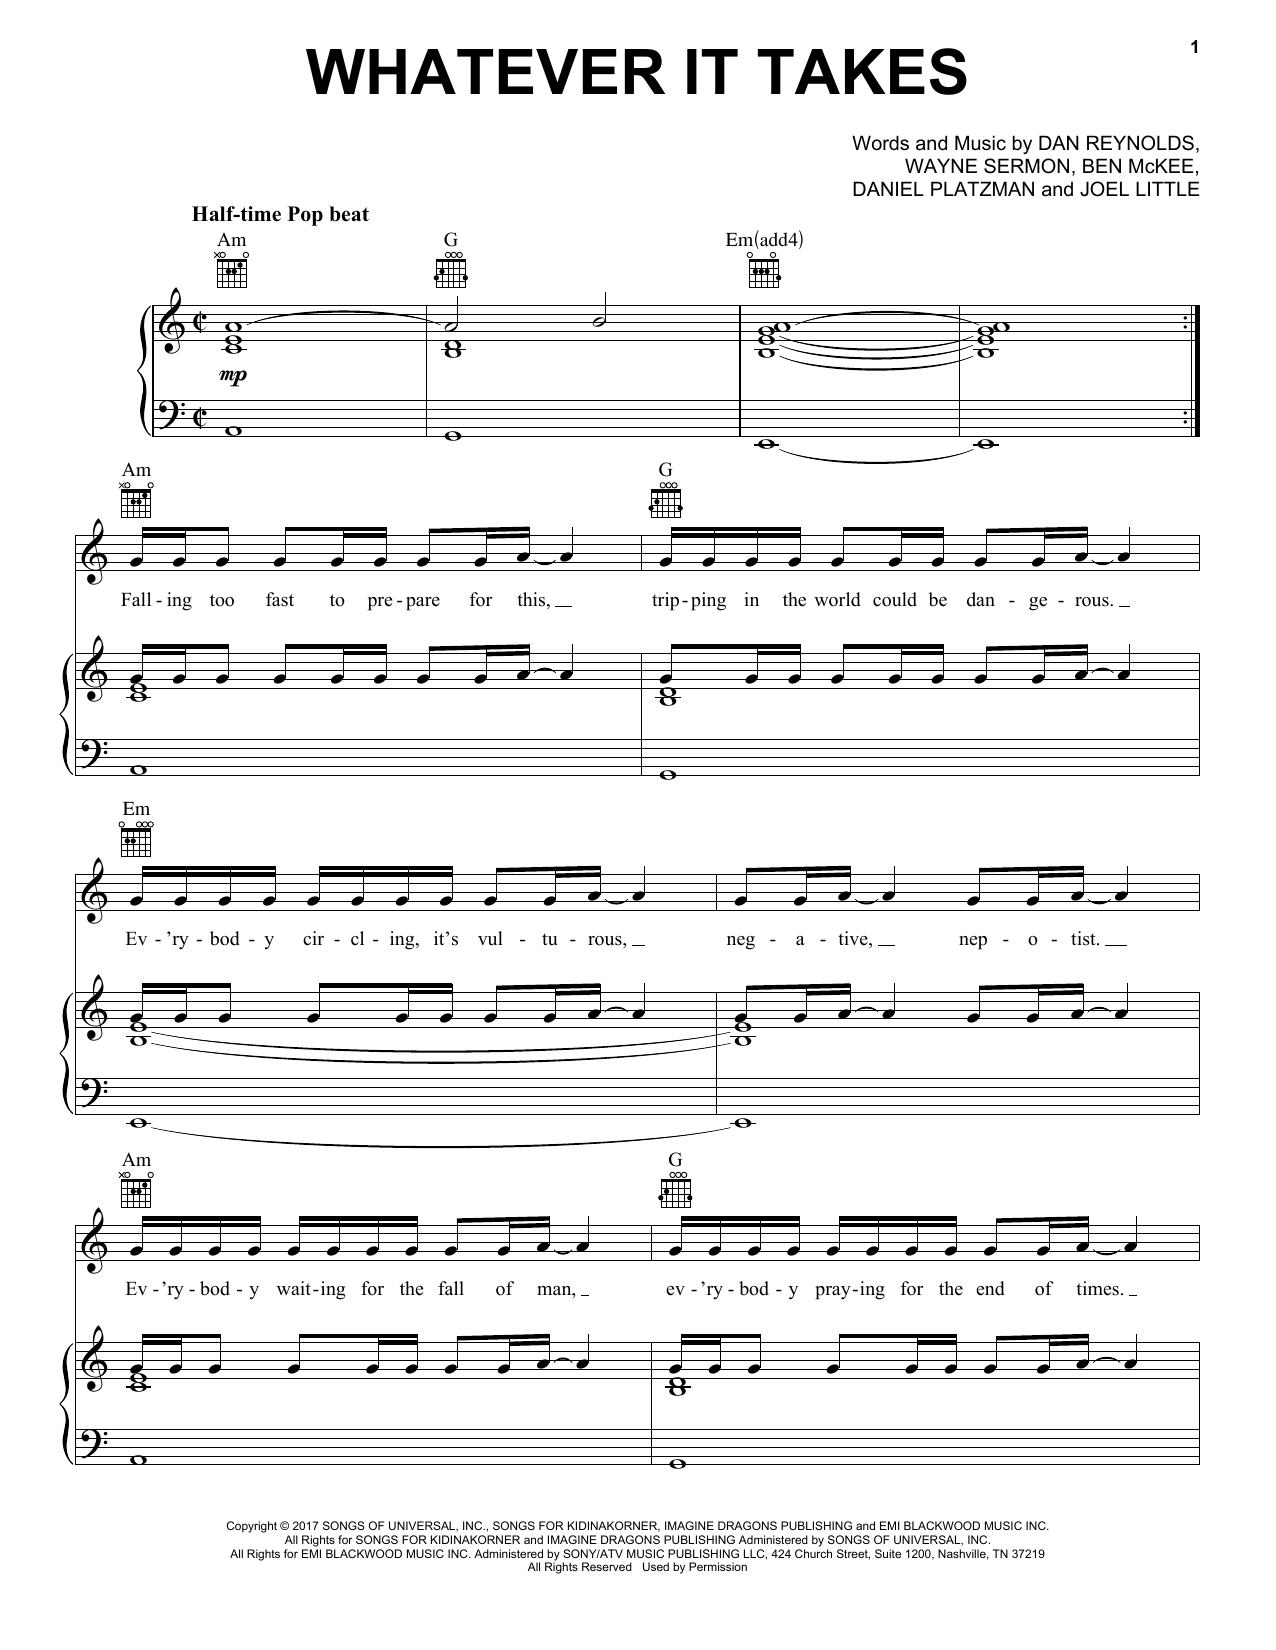 Imagine Dragons Whatever It Takes sheet music notes and chords. Download Printable PDF.